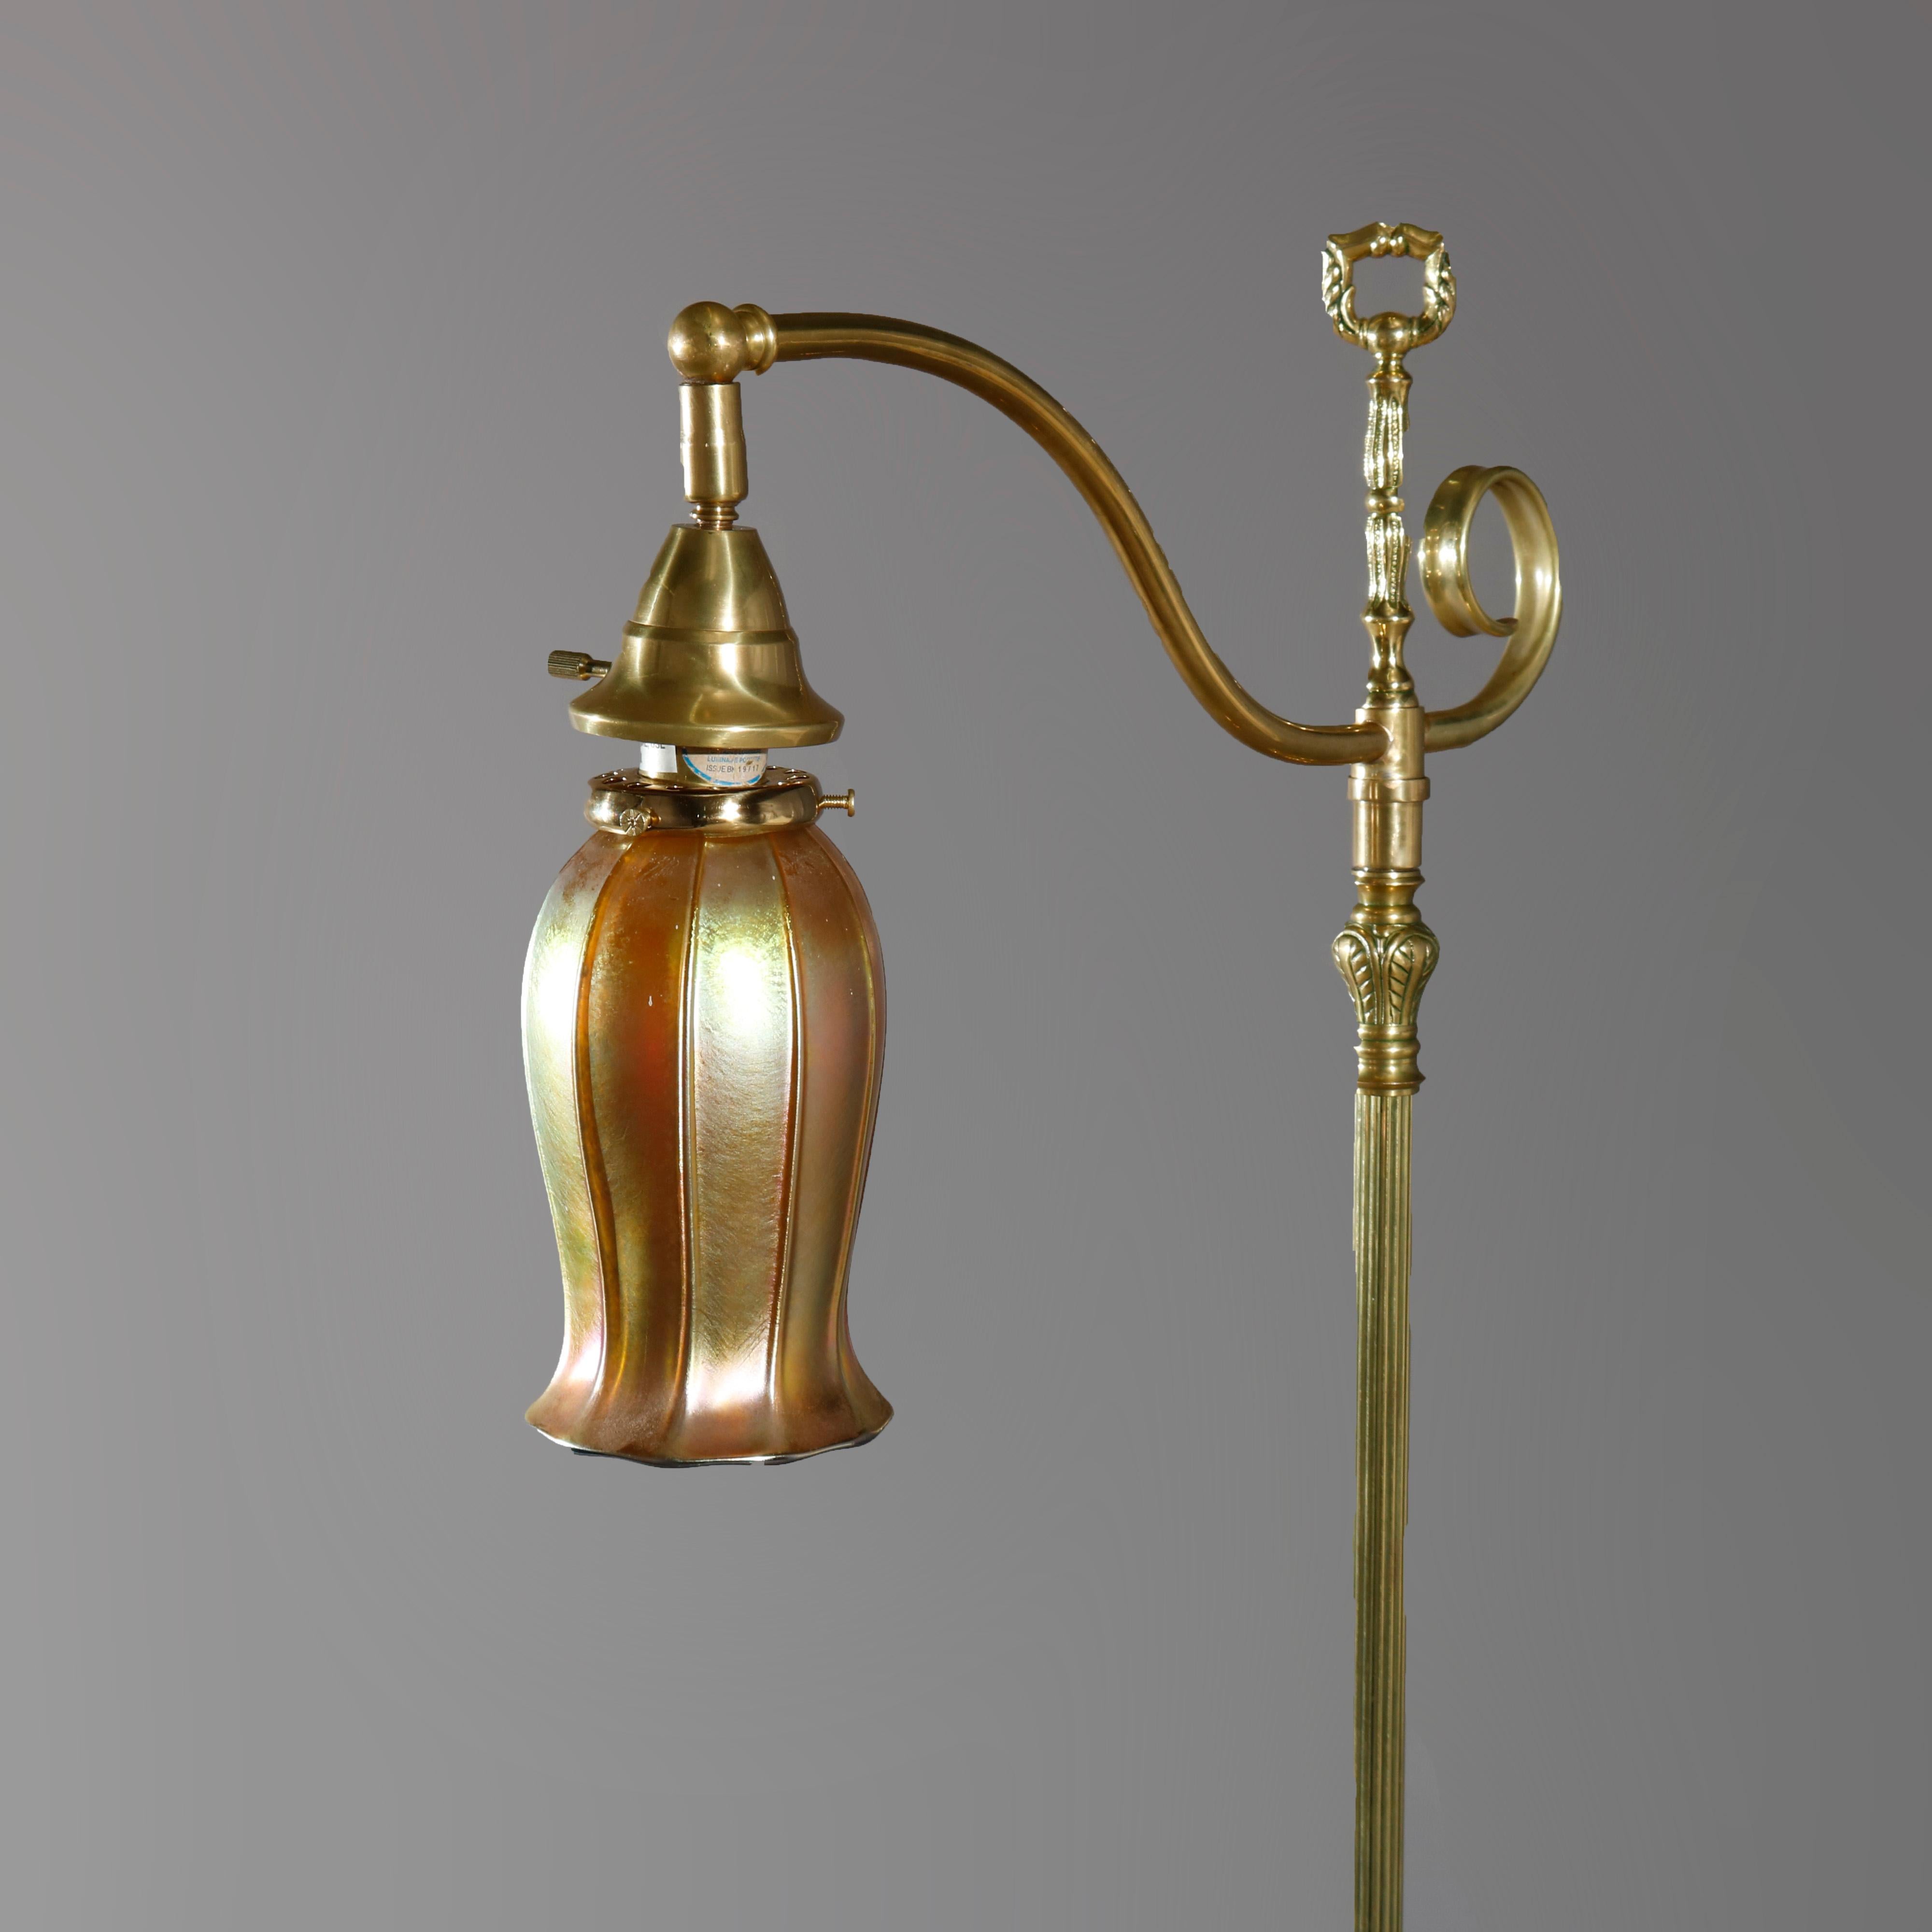 An antique Arts and Crafts floor lamp in the manner of Caldwell offers brass construction with reeded post having central pierced element, scroll form arm terminating in gold aurene Steuben art glass shade, and raised on square base having stylized